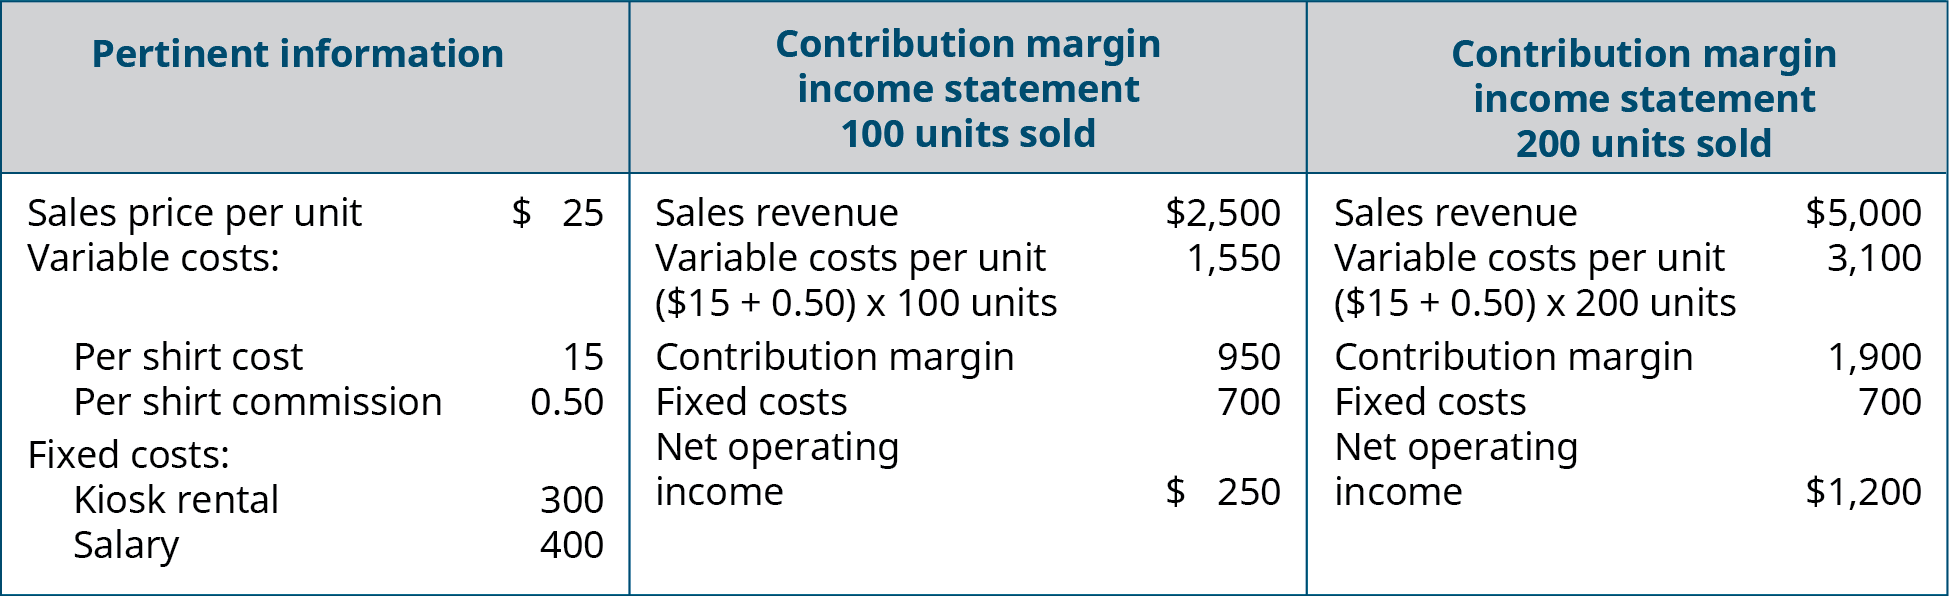 Pertinent Information Per Unit, Contribution Margin Income Statement 100 Units Sold, and Contribution Margin Income Statement 200 Units Sold (respectively): Sales Price (revenue) $25, 2,500, 5,000; Variable Cost 15.50, 1,550, 3,100; Contribution Margin 9.50, 950, 1,900; Fixed Costs: Kiosk Rent 300 and Salary 400, 700, 700; Net Operating Income –, $250, 1,200.